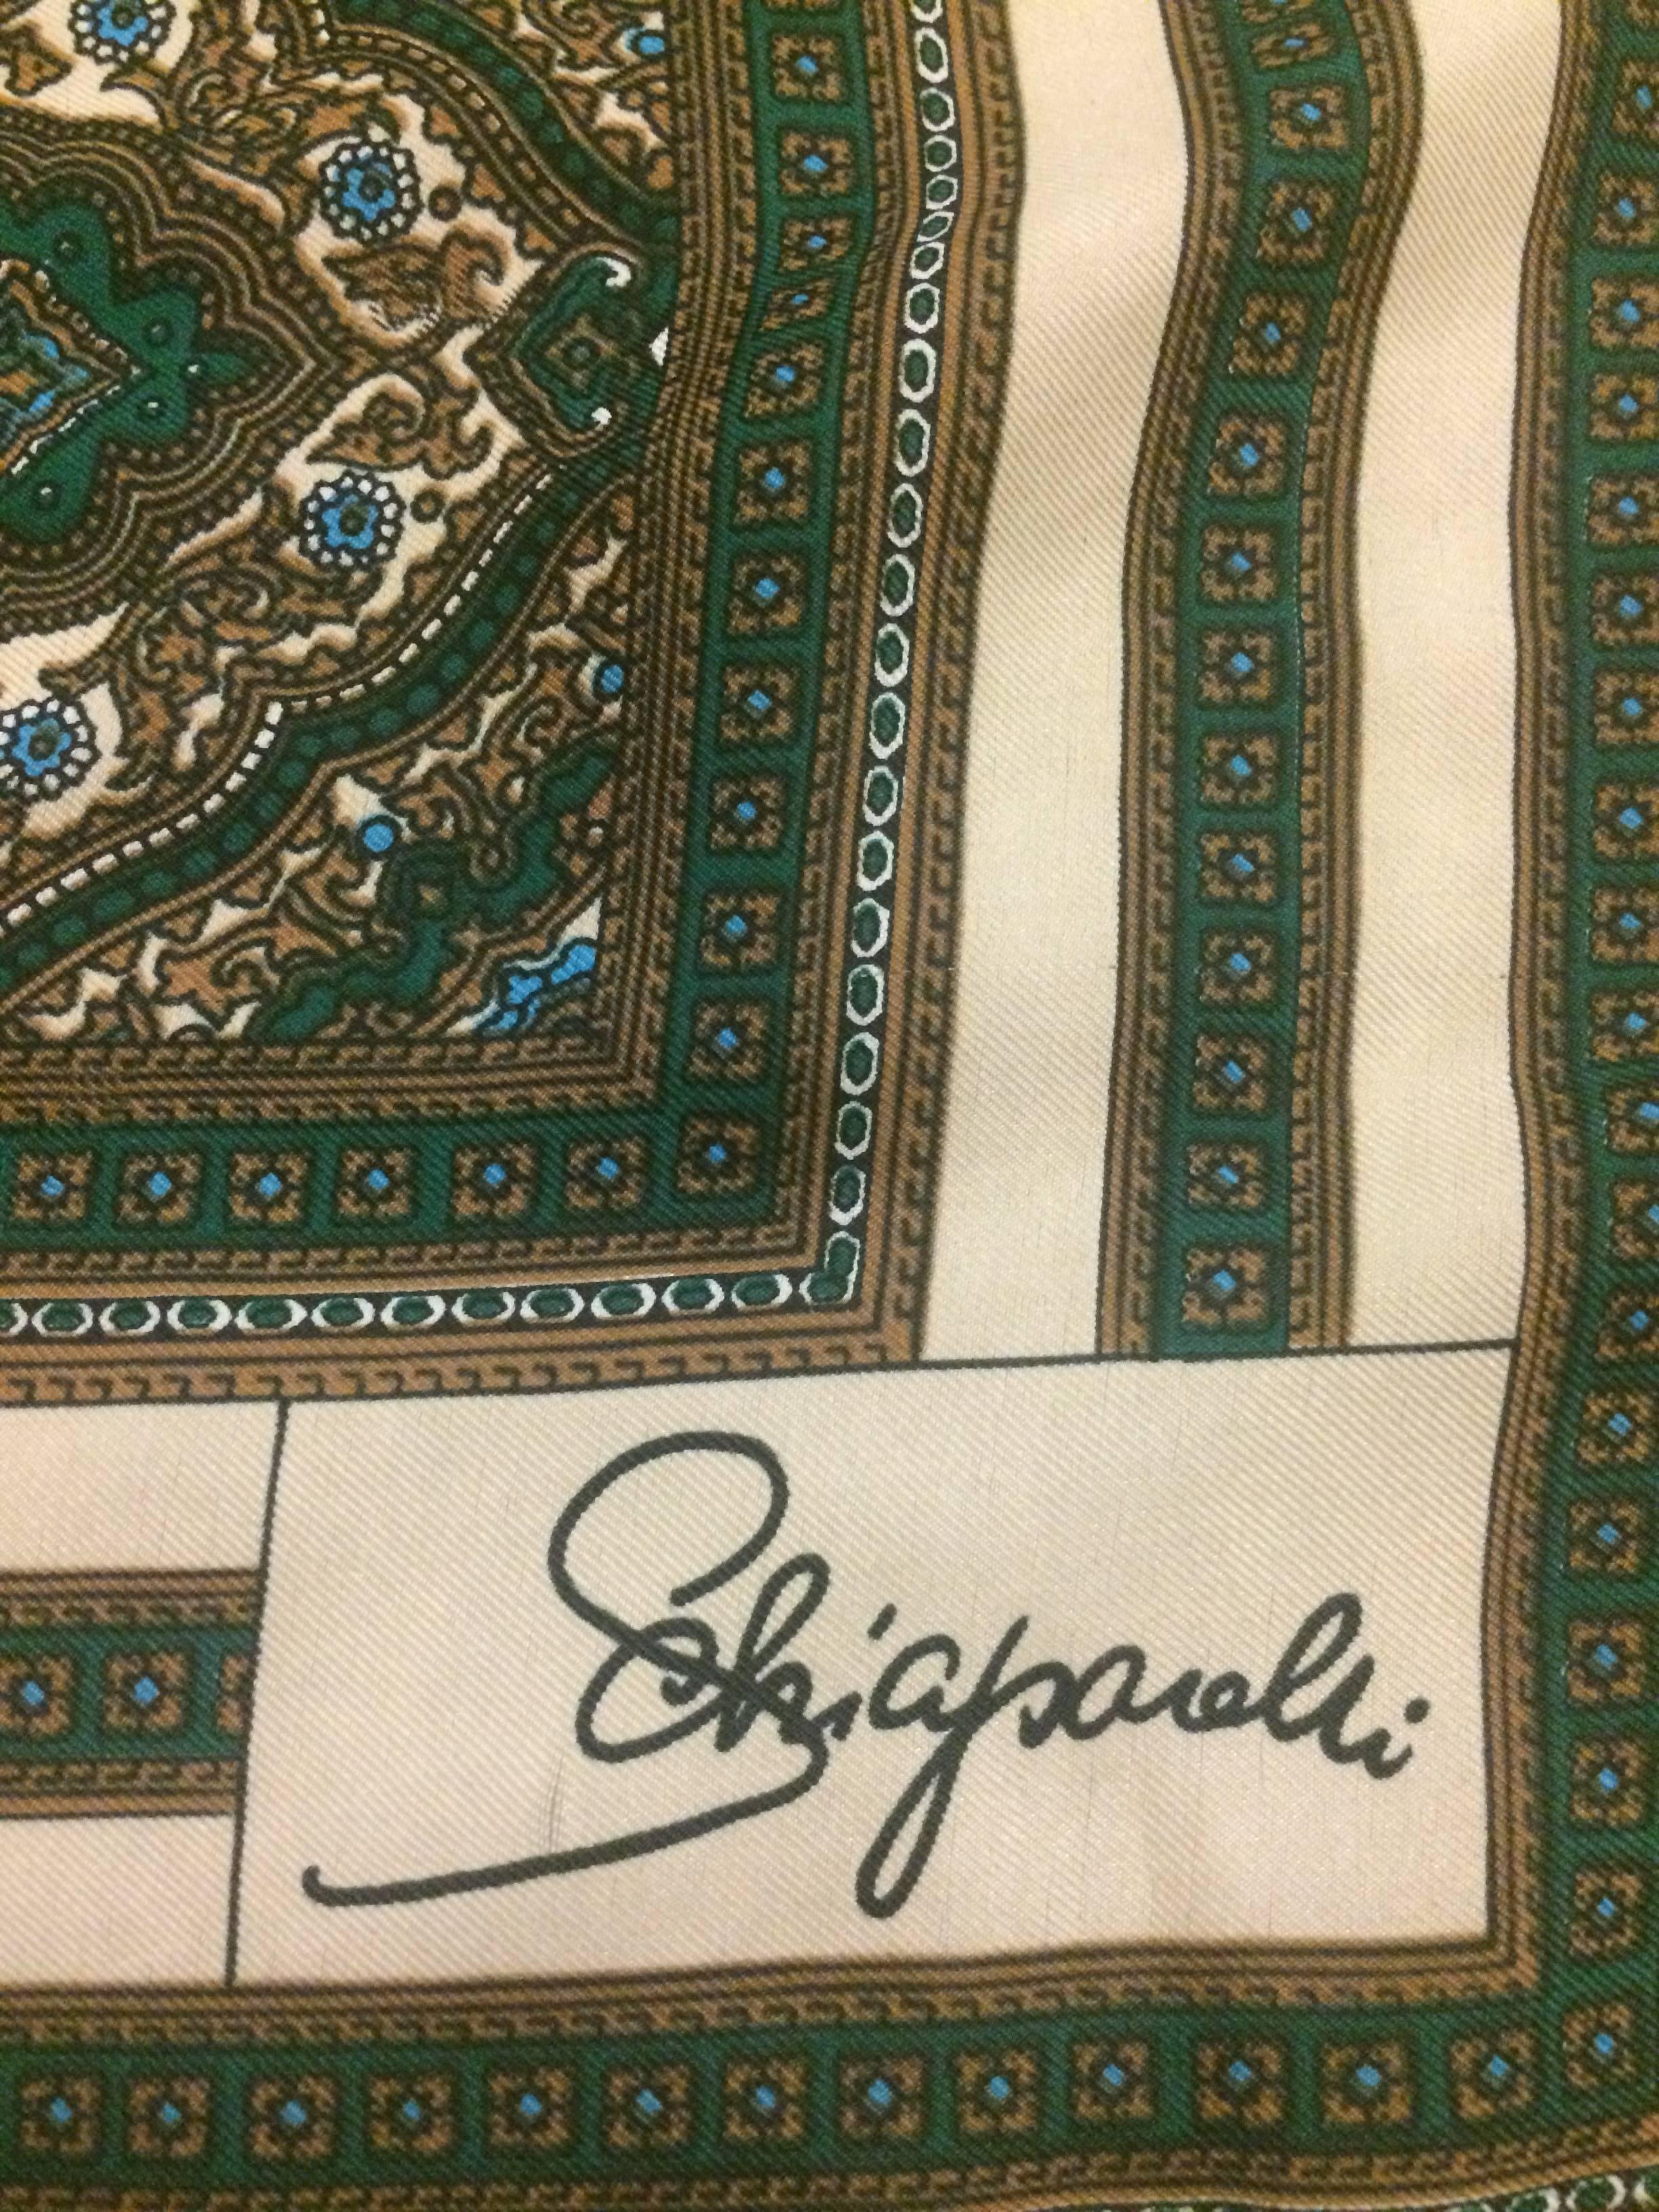 Schiaparelli for Glentex scarf in a cream, brown, green & blue print.

30% silk, 70% rayon.

Made in Japan.

Approximately 22 1/2